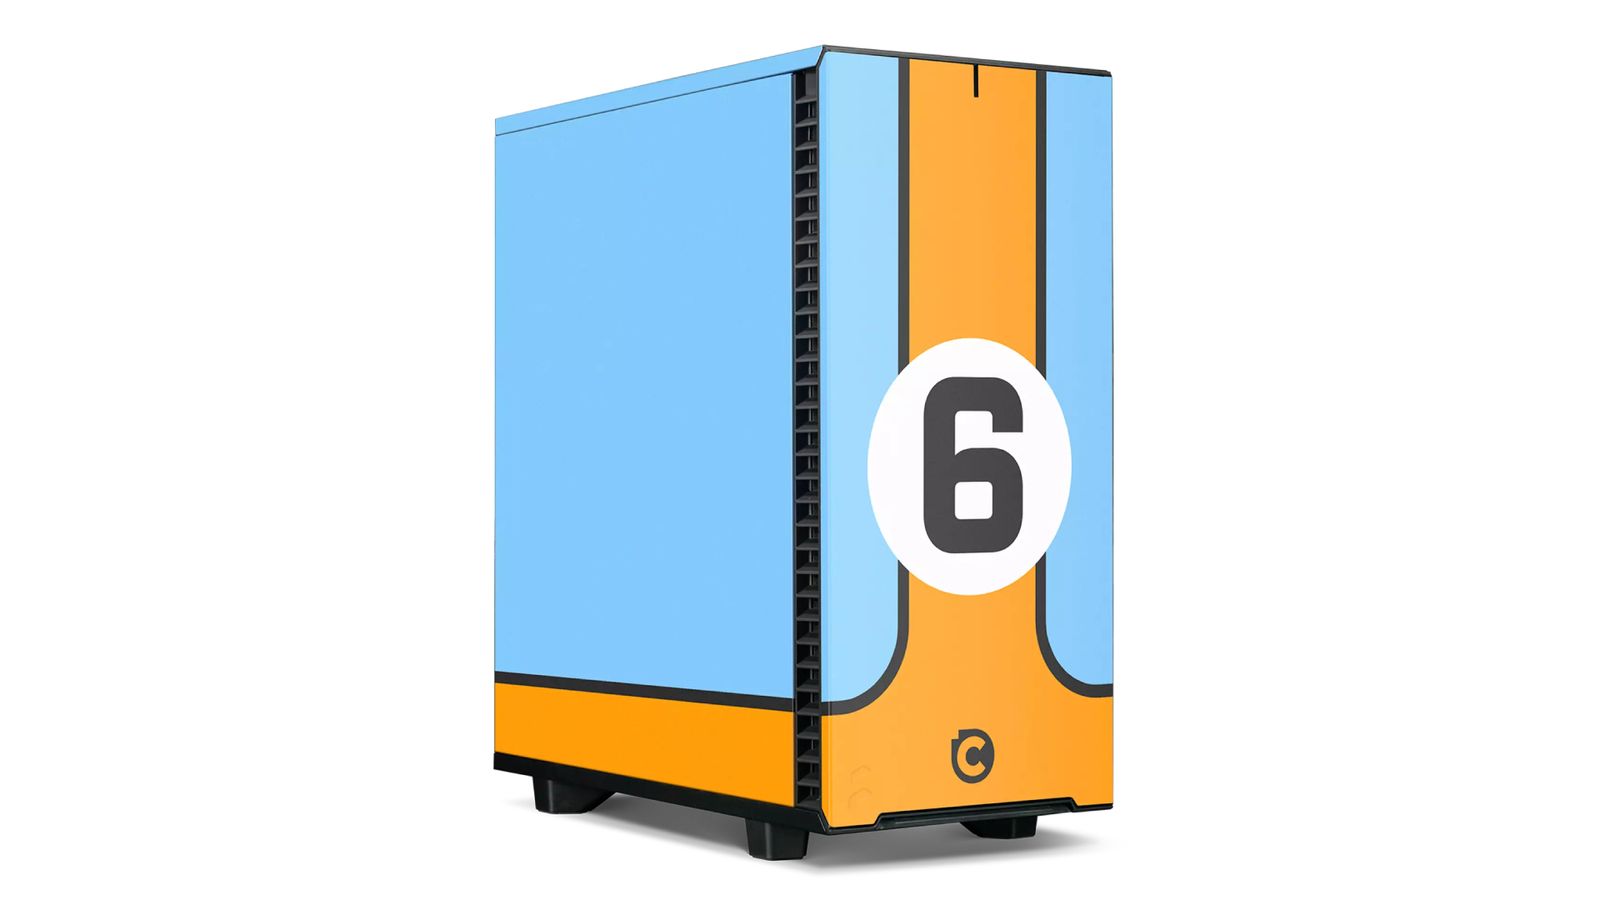 Chillblast Legends Gran Tour PC product image of a desktop encased in a light blue and orange Gulf livery.